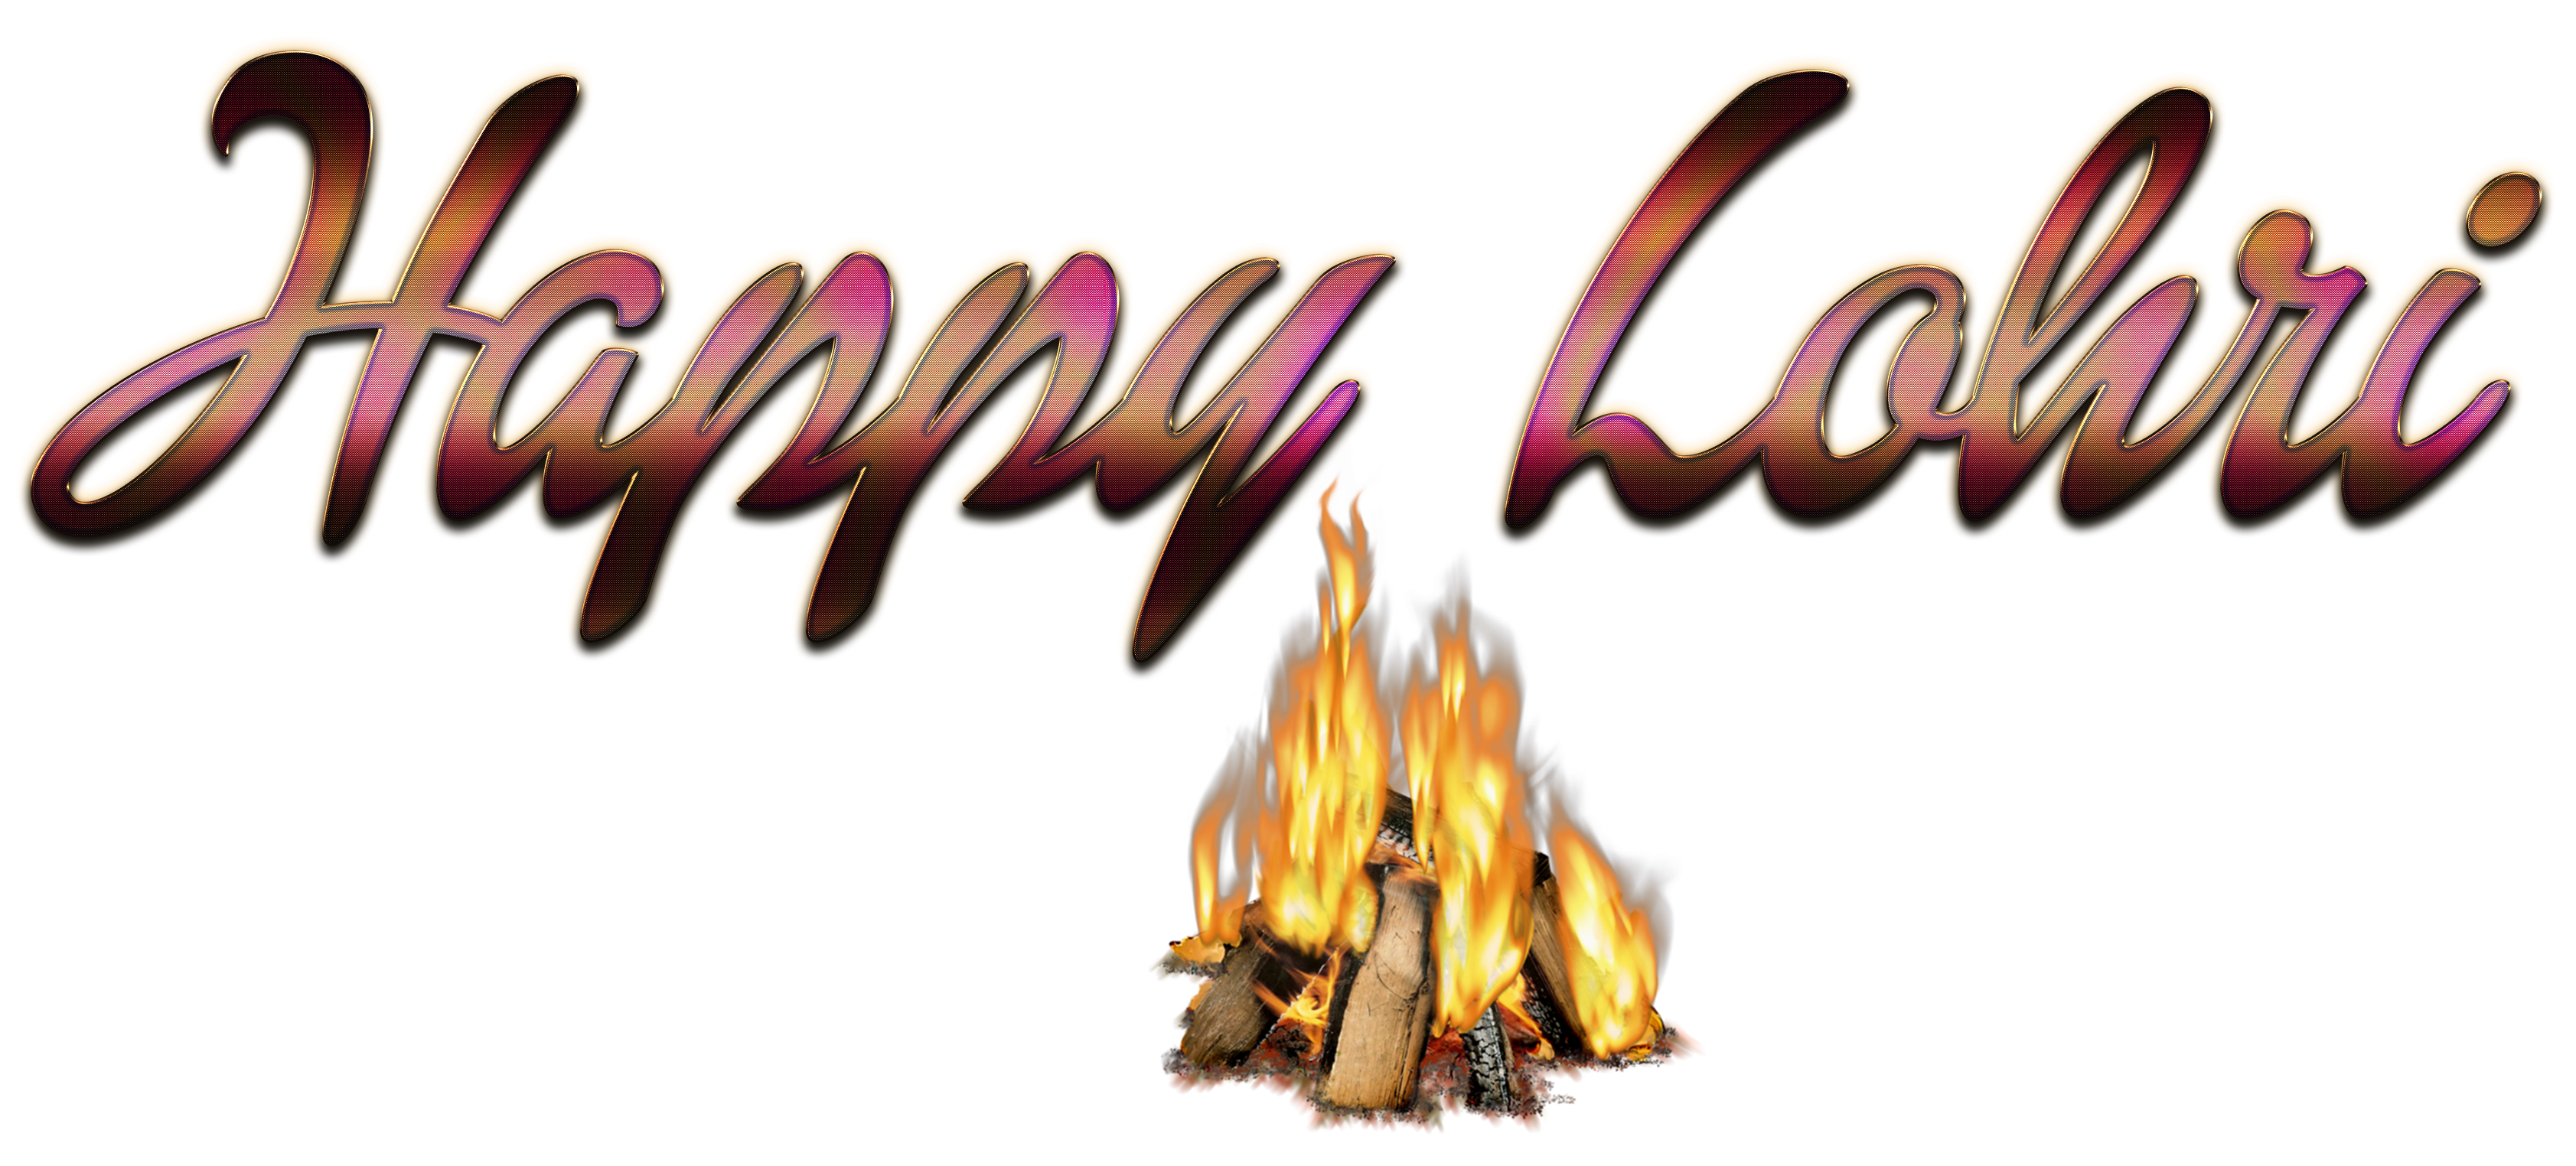 A Fire With Text Overlay